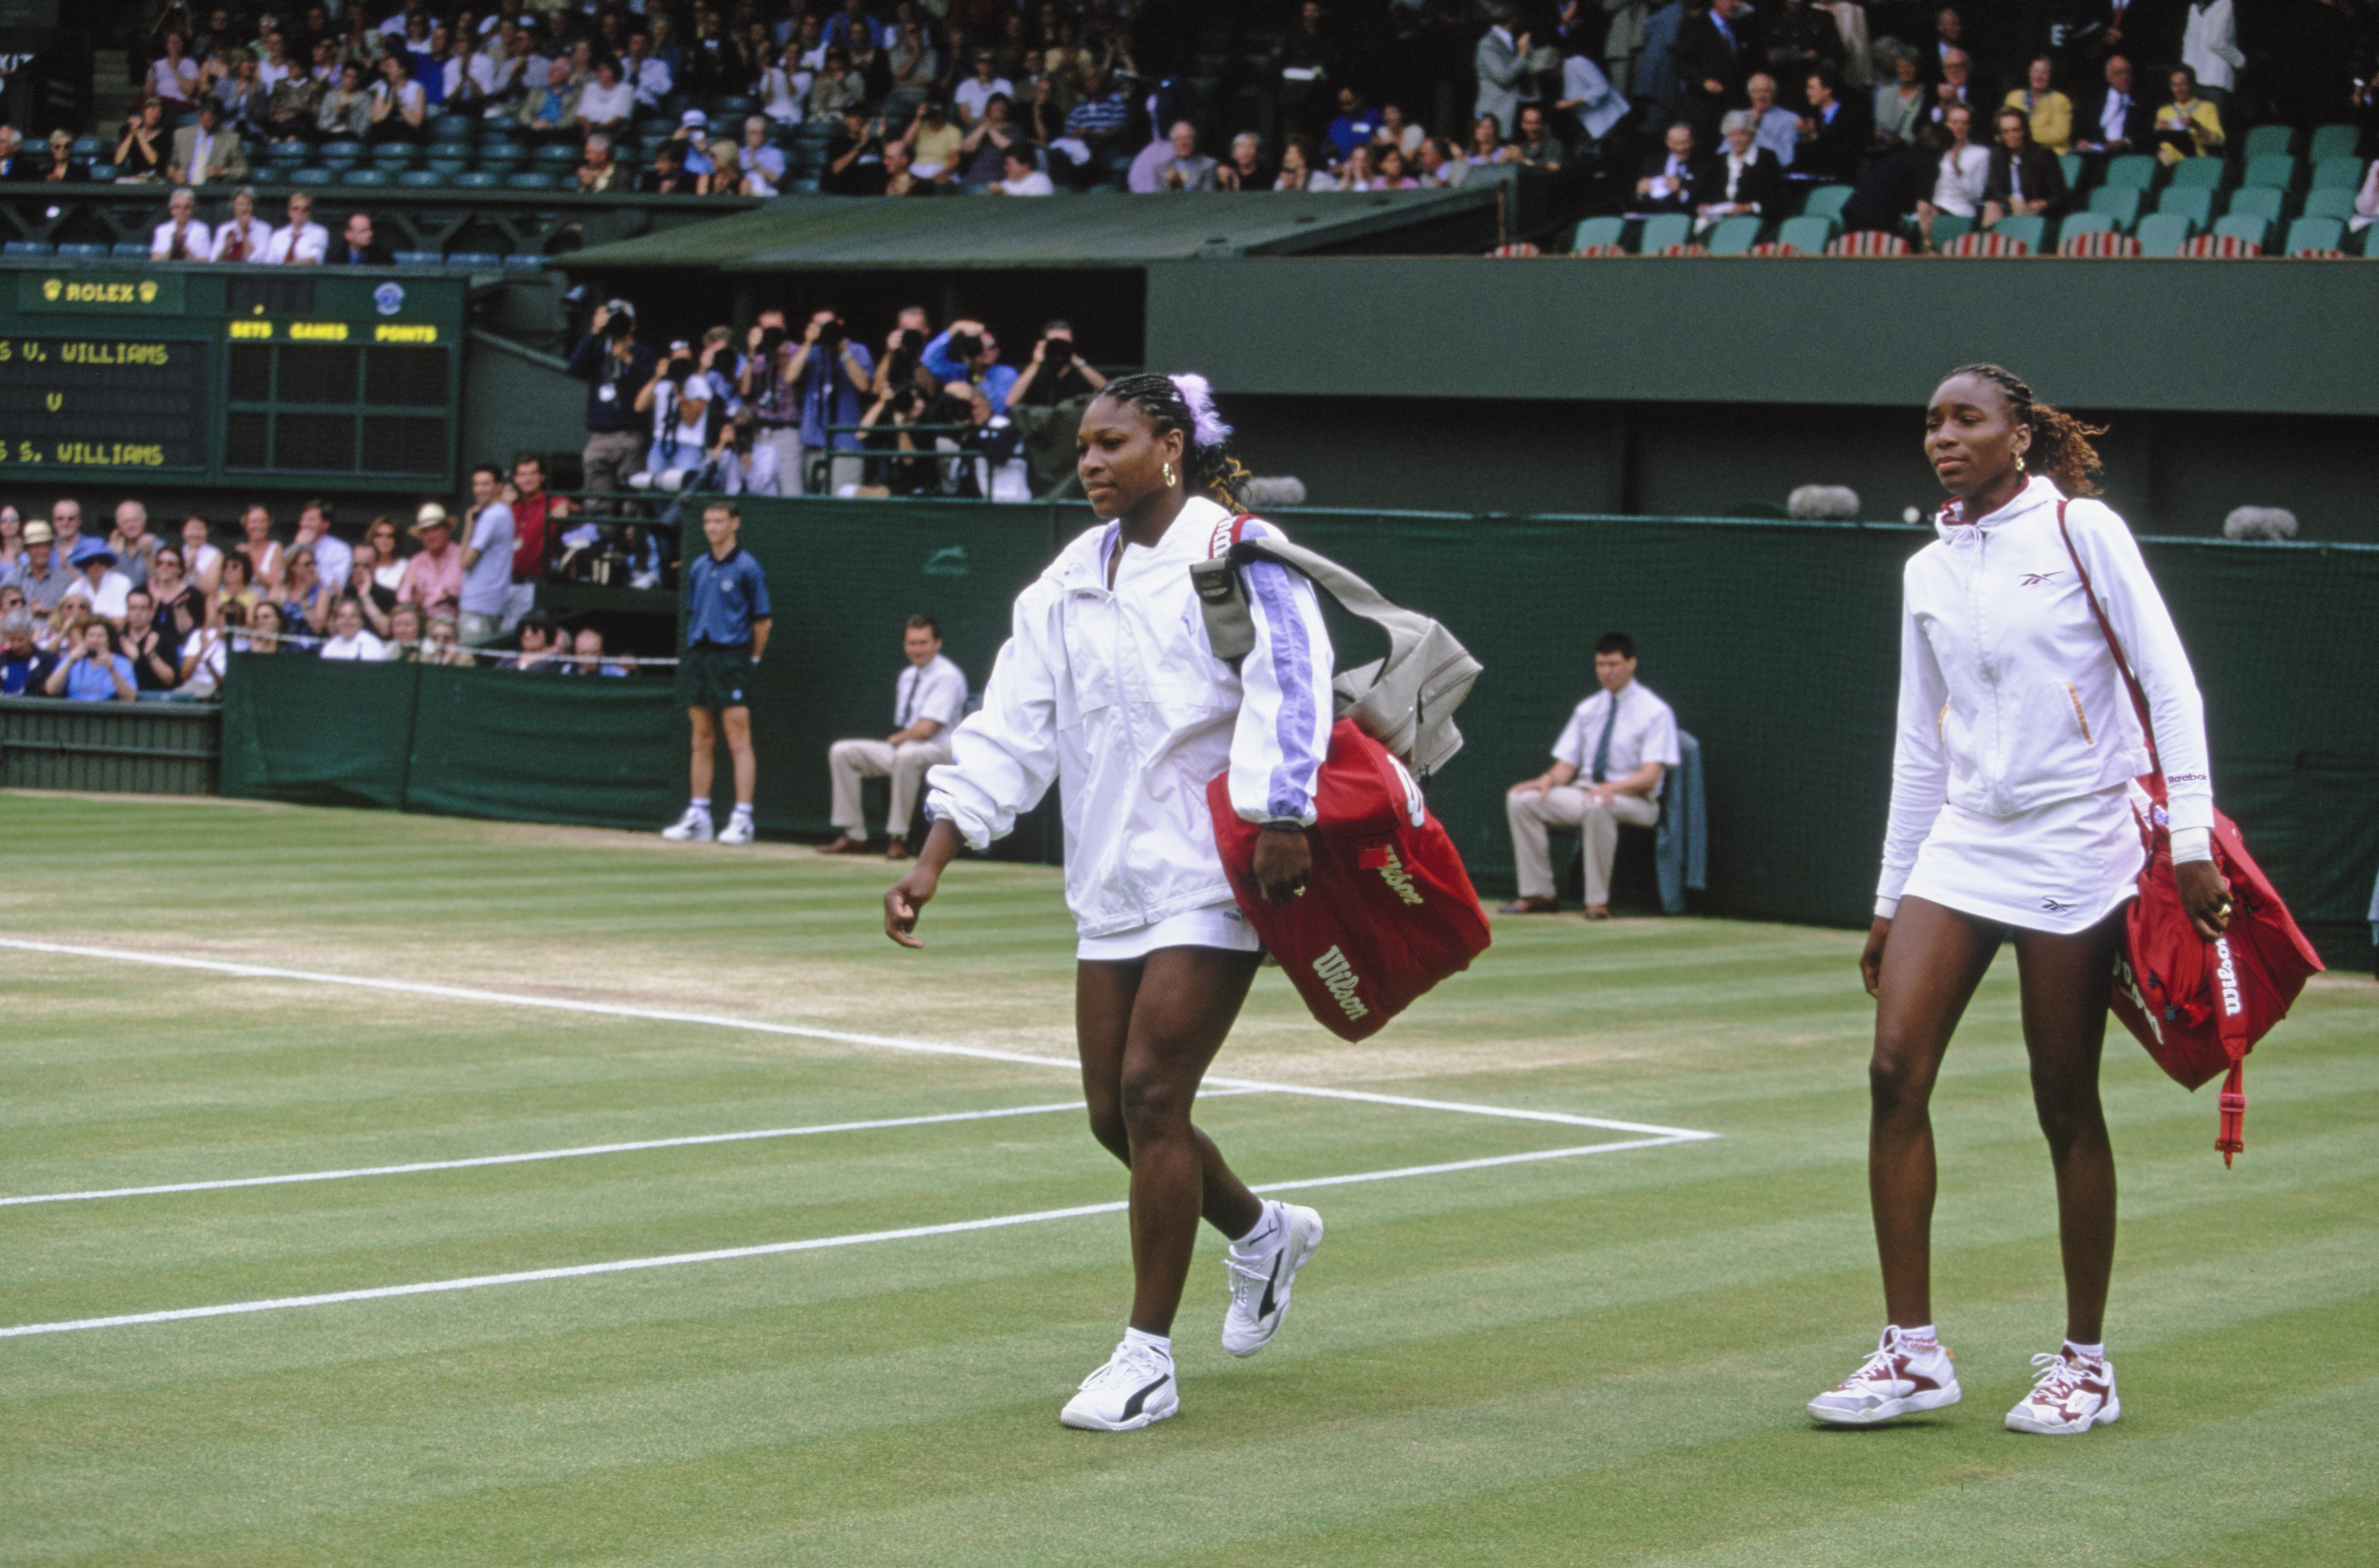 Serena and Venus Williams at Wimbledon, London, England on July 6, 2000 | Source: Getty Images